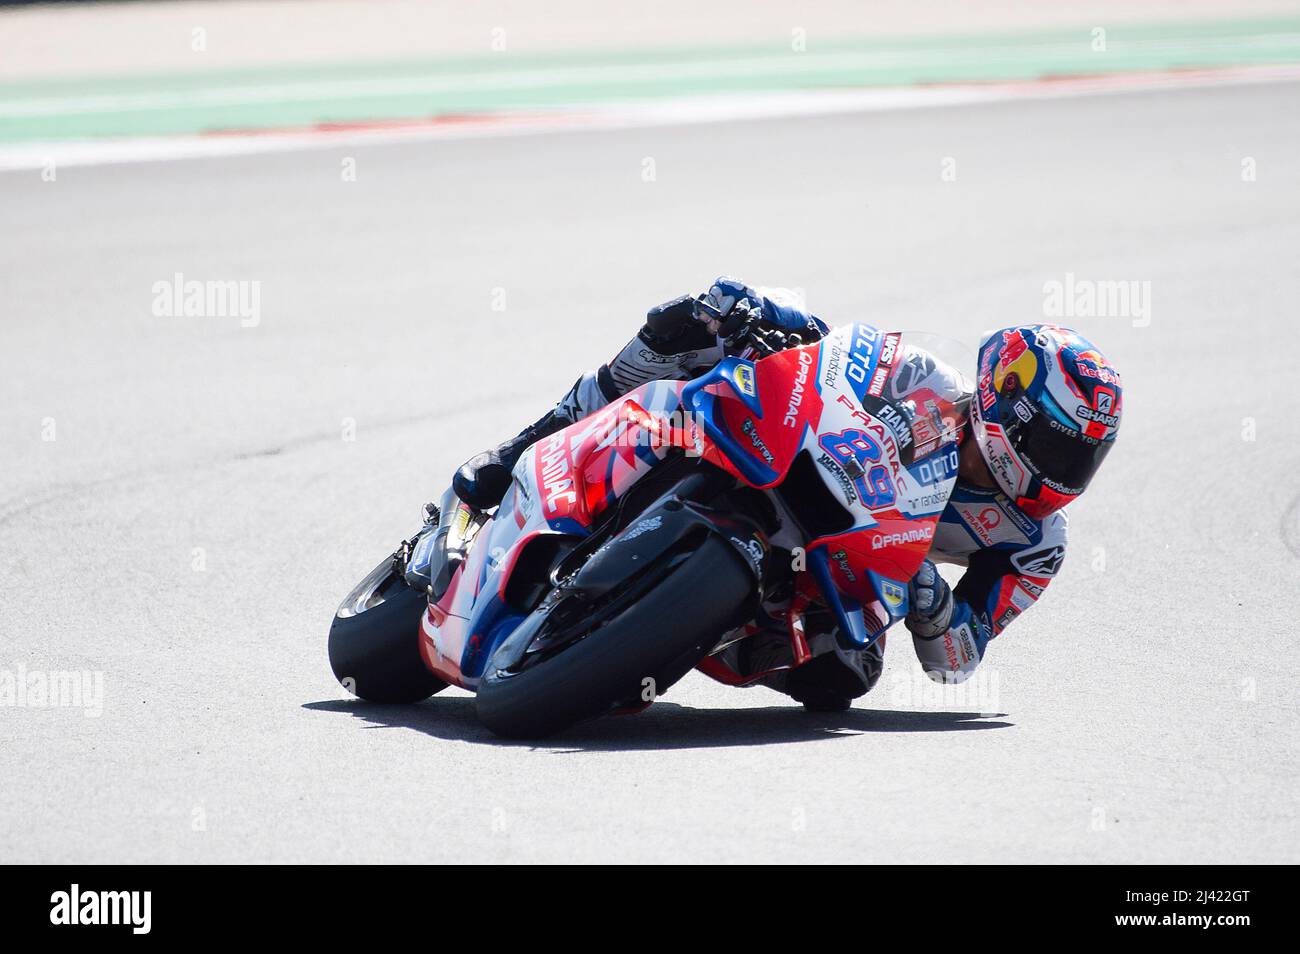 April 09, 2022: Jorge Martin #89 with Pramac Racing in action Free Practice  3 at the MotoGP Red Bull Grand Prix of the Americas, Circuit of The  Americas, Austin,Texas. (Photo by Mario